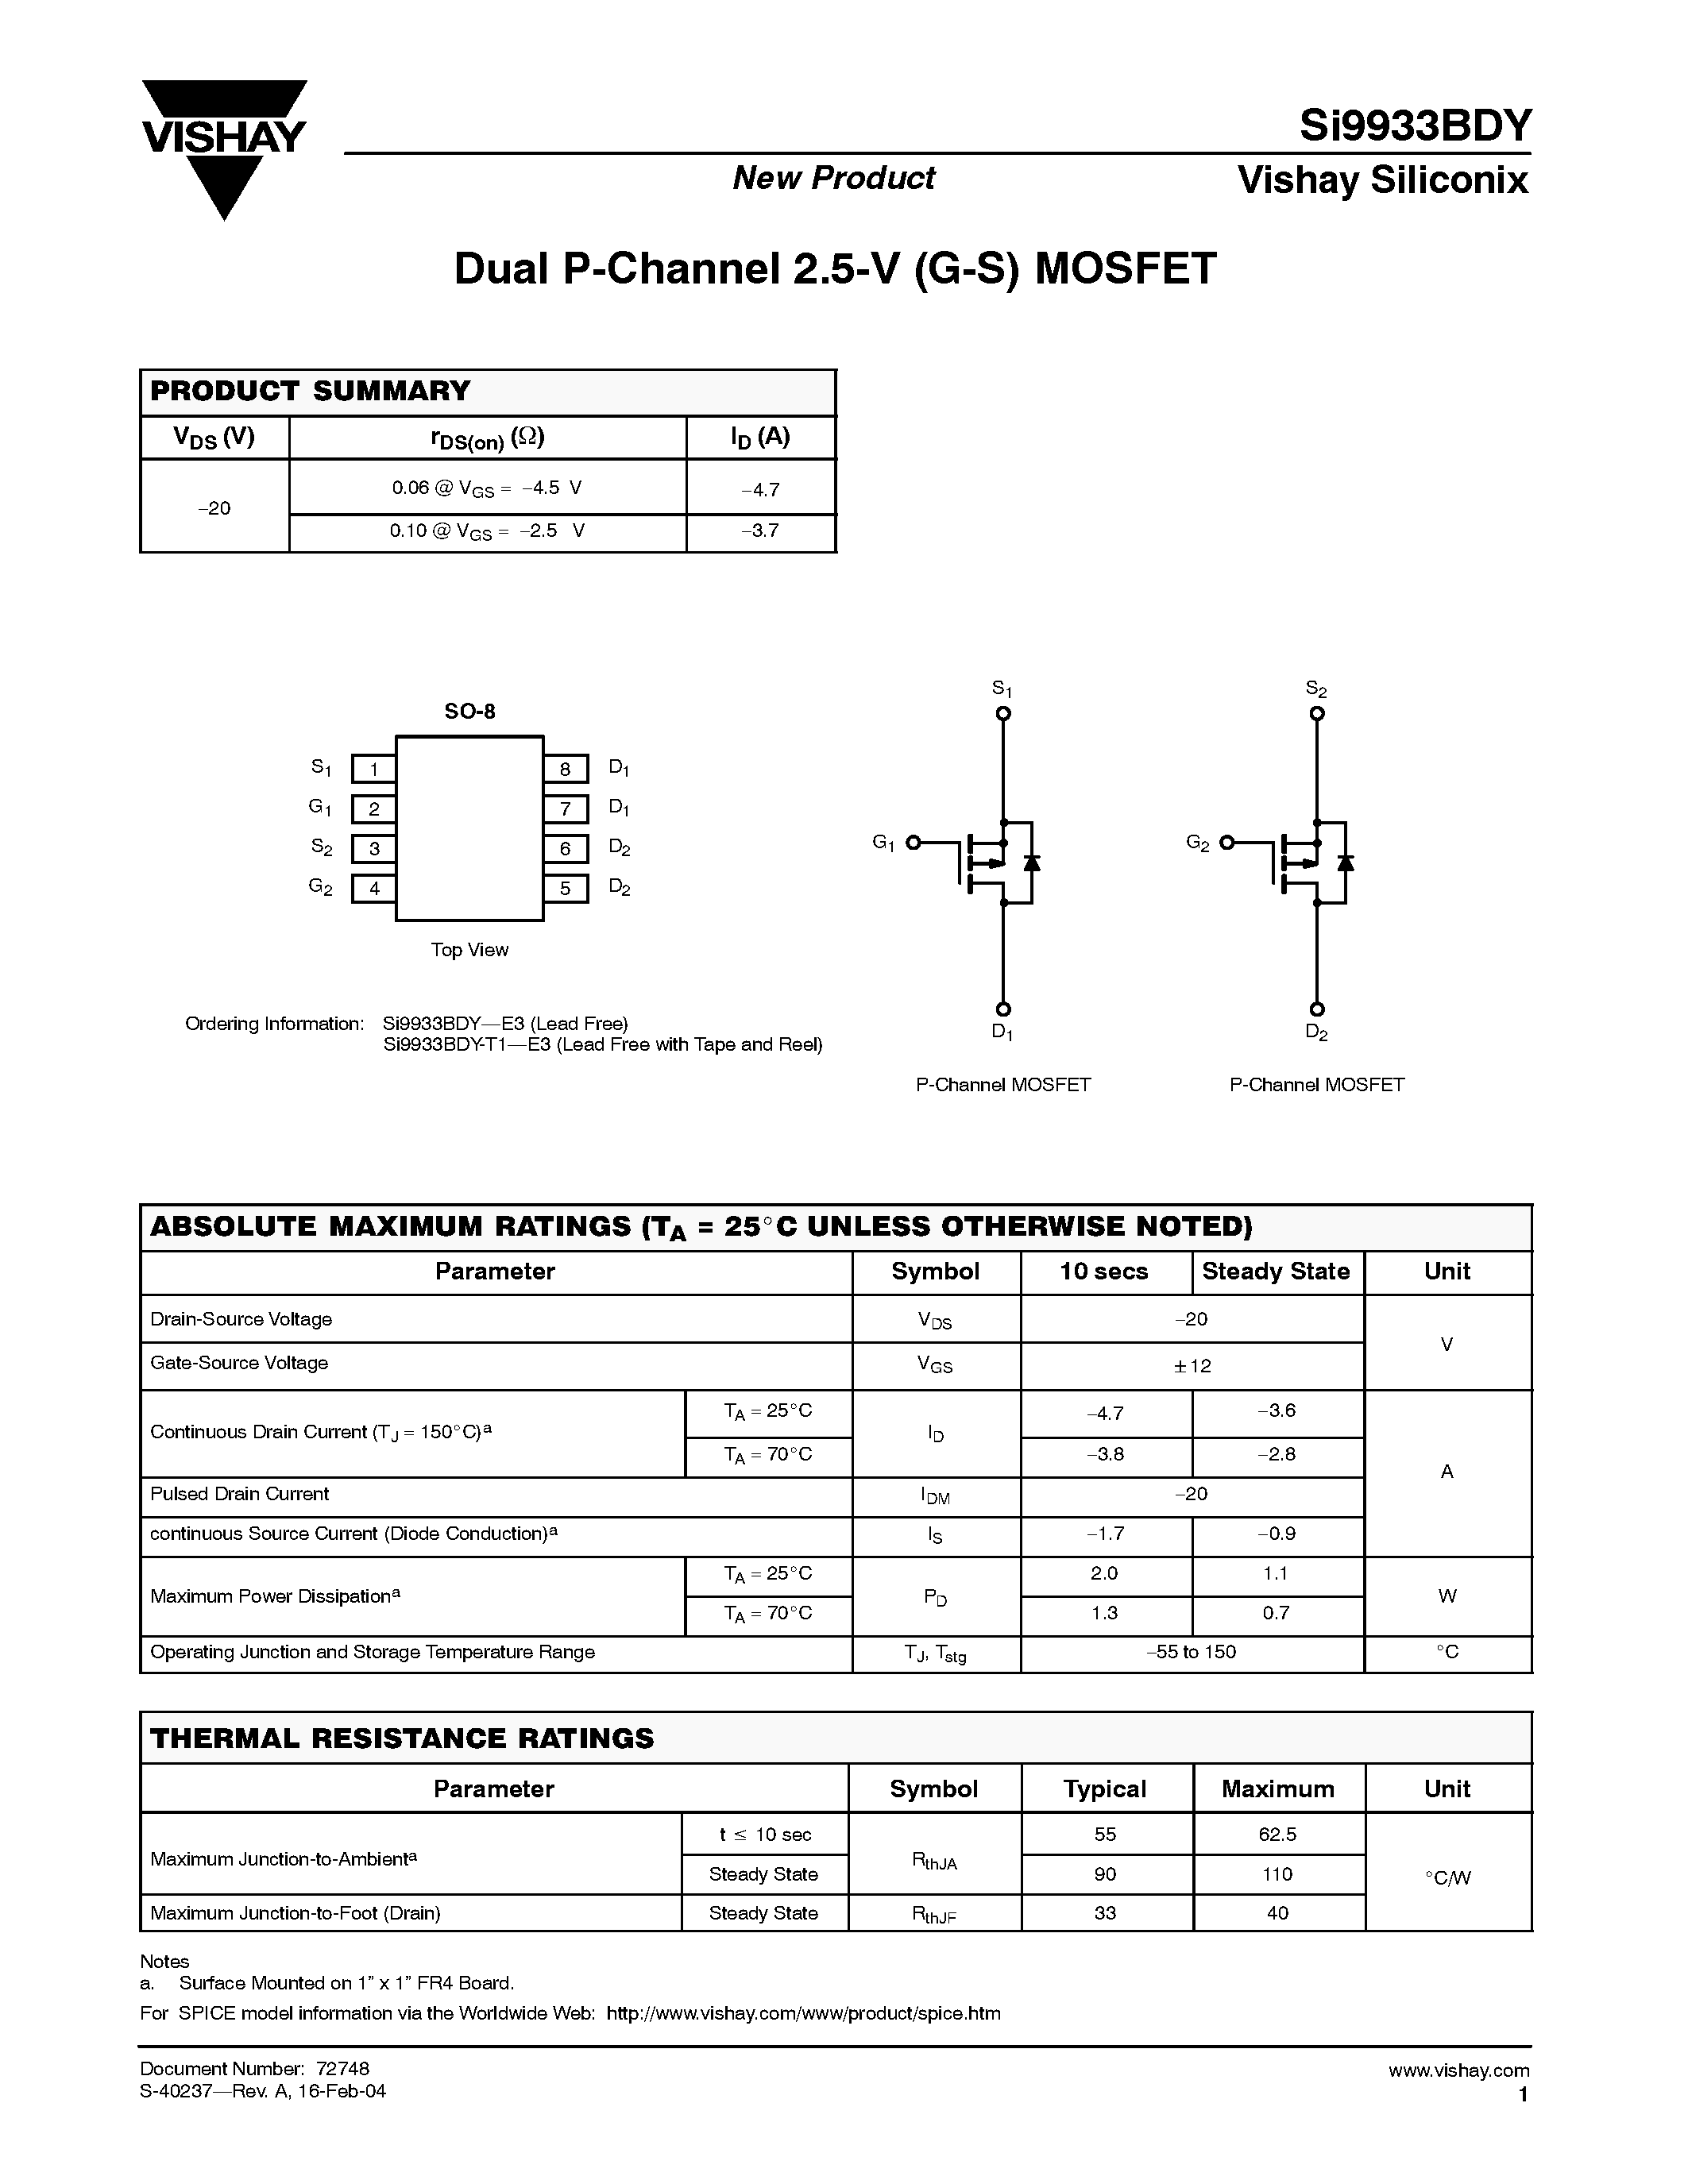 Datasheet SI9933BDY-E3 - Dual P-Channel 2.5-V (G-S) MOSFET page 1